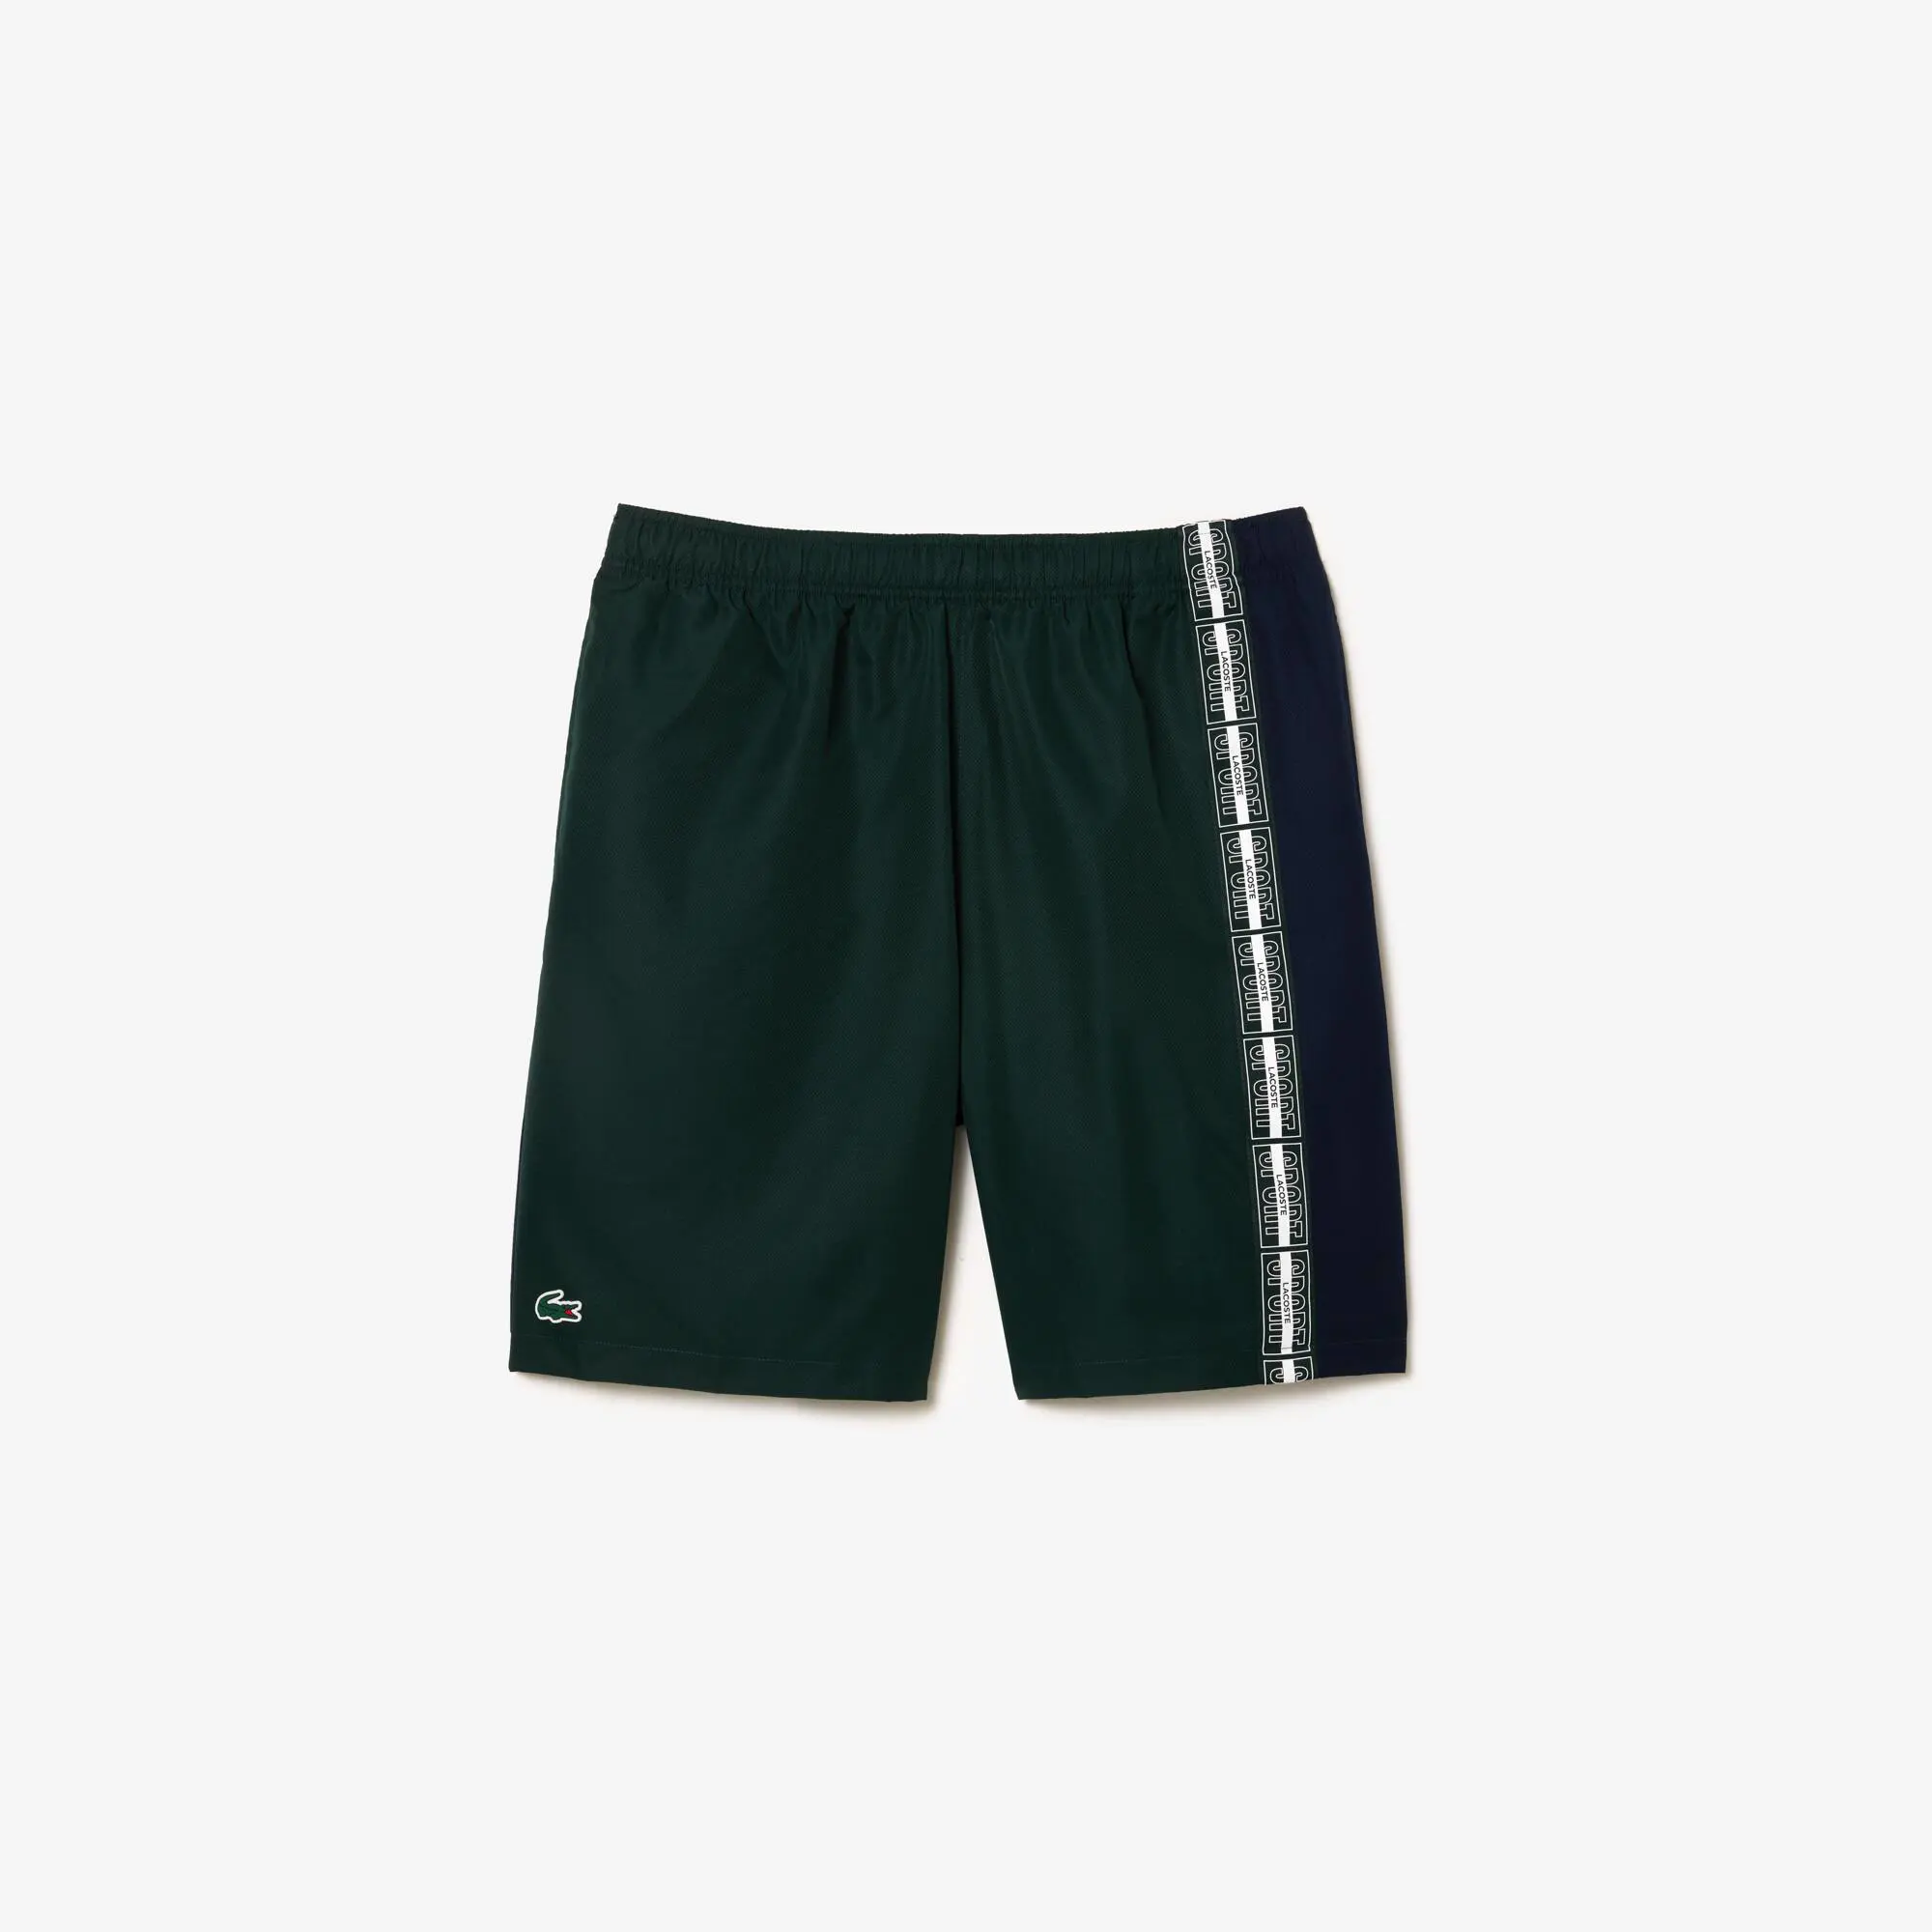 Lacoste Regular Fit Recycled Fiber Tennis Shorts. 1